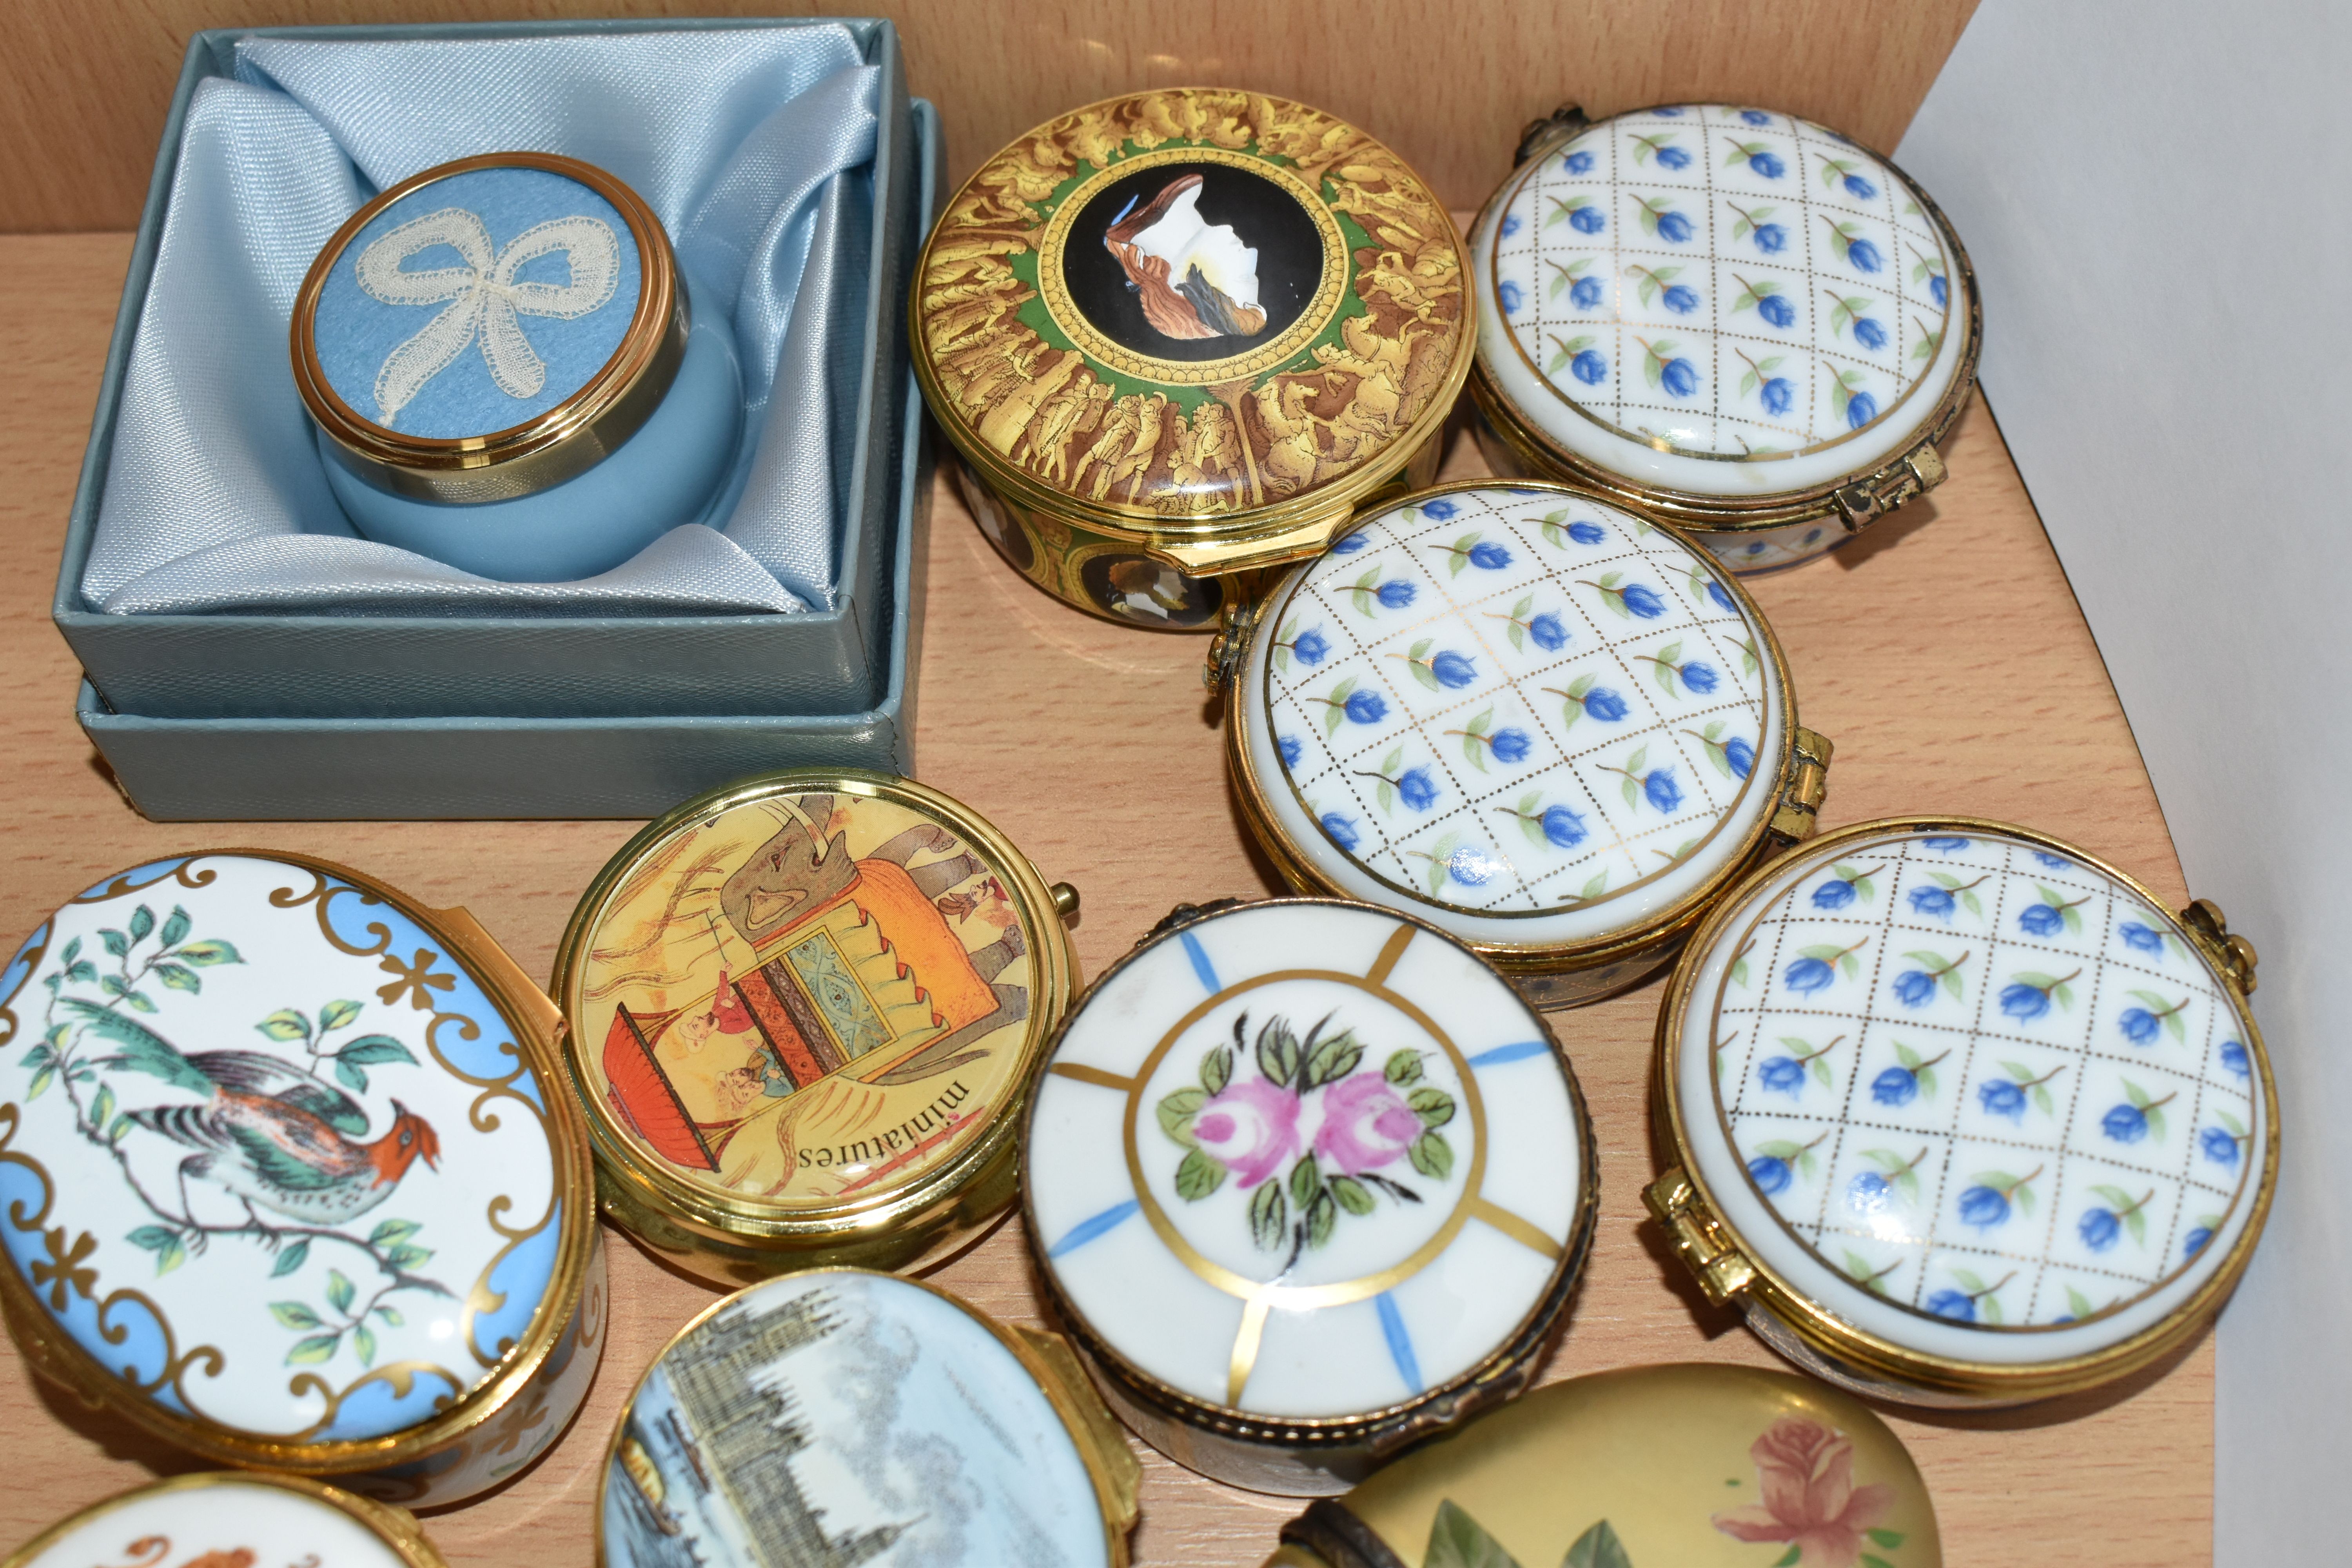 A COLLECTION OF ENAMEL AND PORCELAIN TRINKET BOXES, sixteen pieces to include Limoges, Crummles & - Image 4 of 6